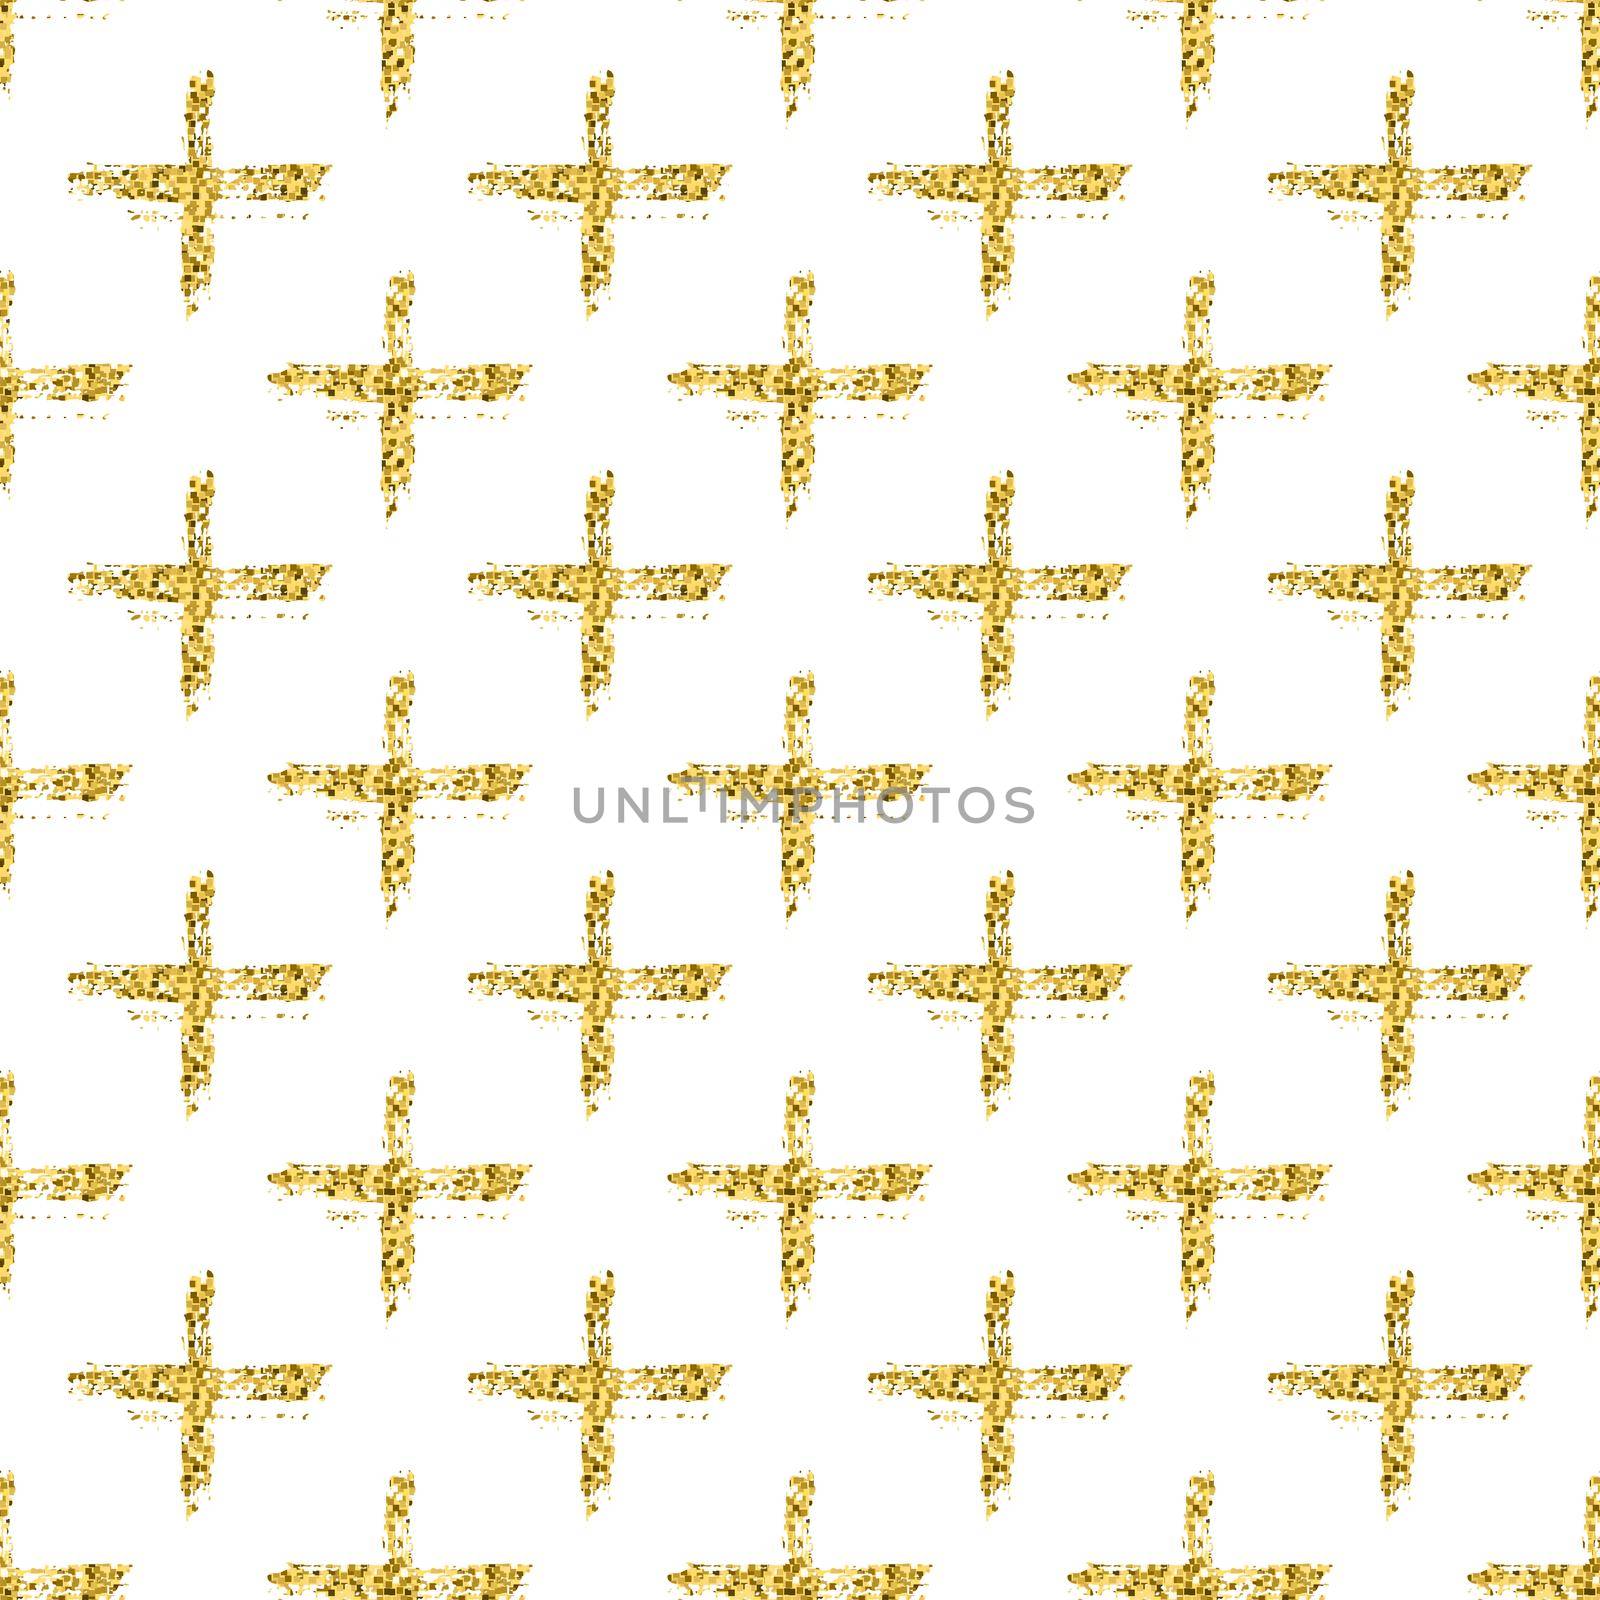 Modern seamless pattern with brush shiny cross. Gold metallic color on white background. Golden glitter texture. Ink geometric elements. Fashion catwalk style. Repeat fabric cloth print. by DesignAB